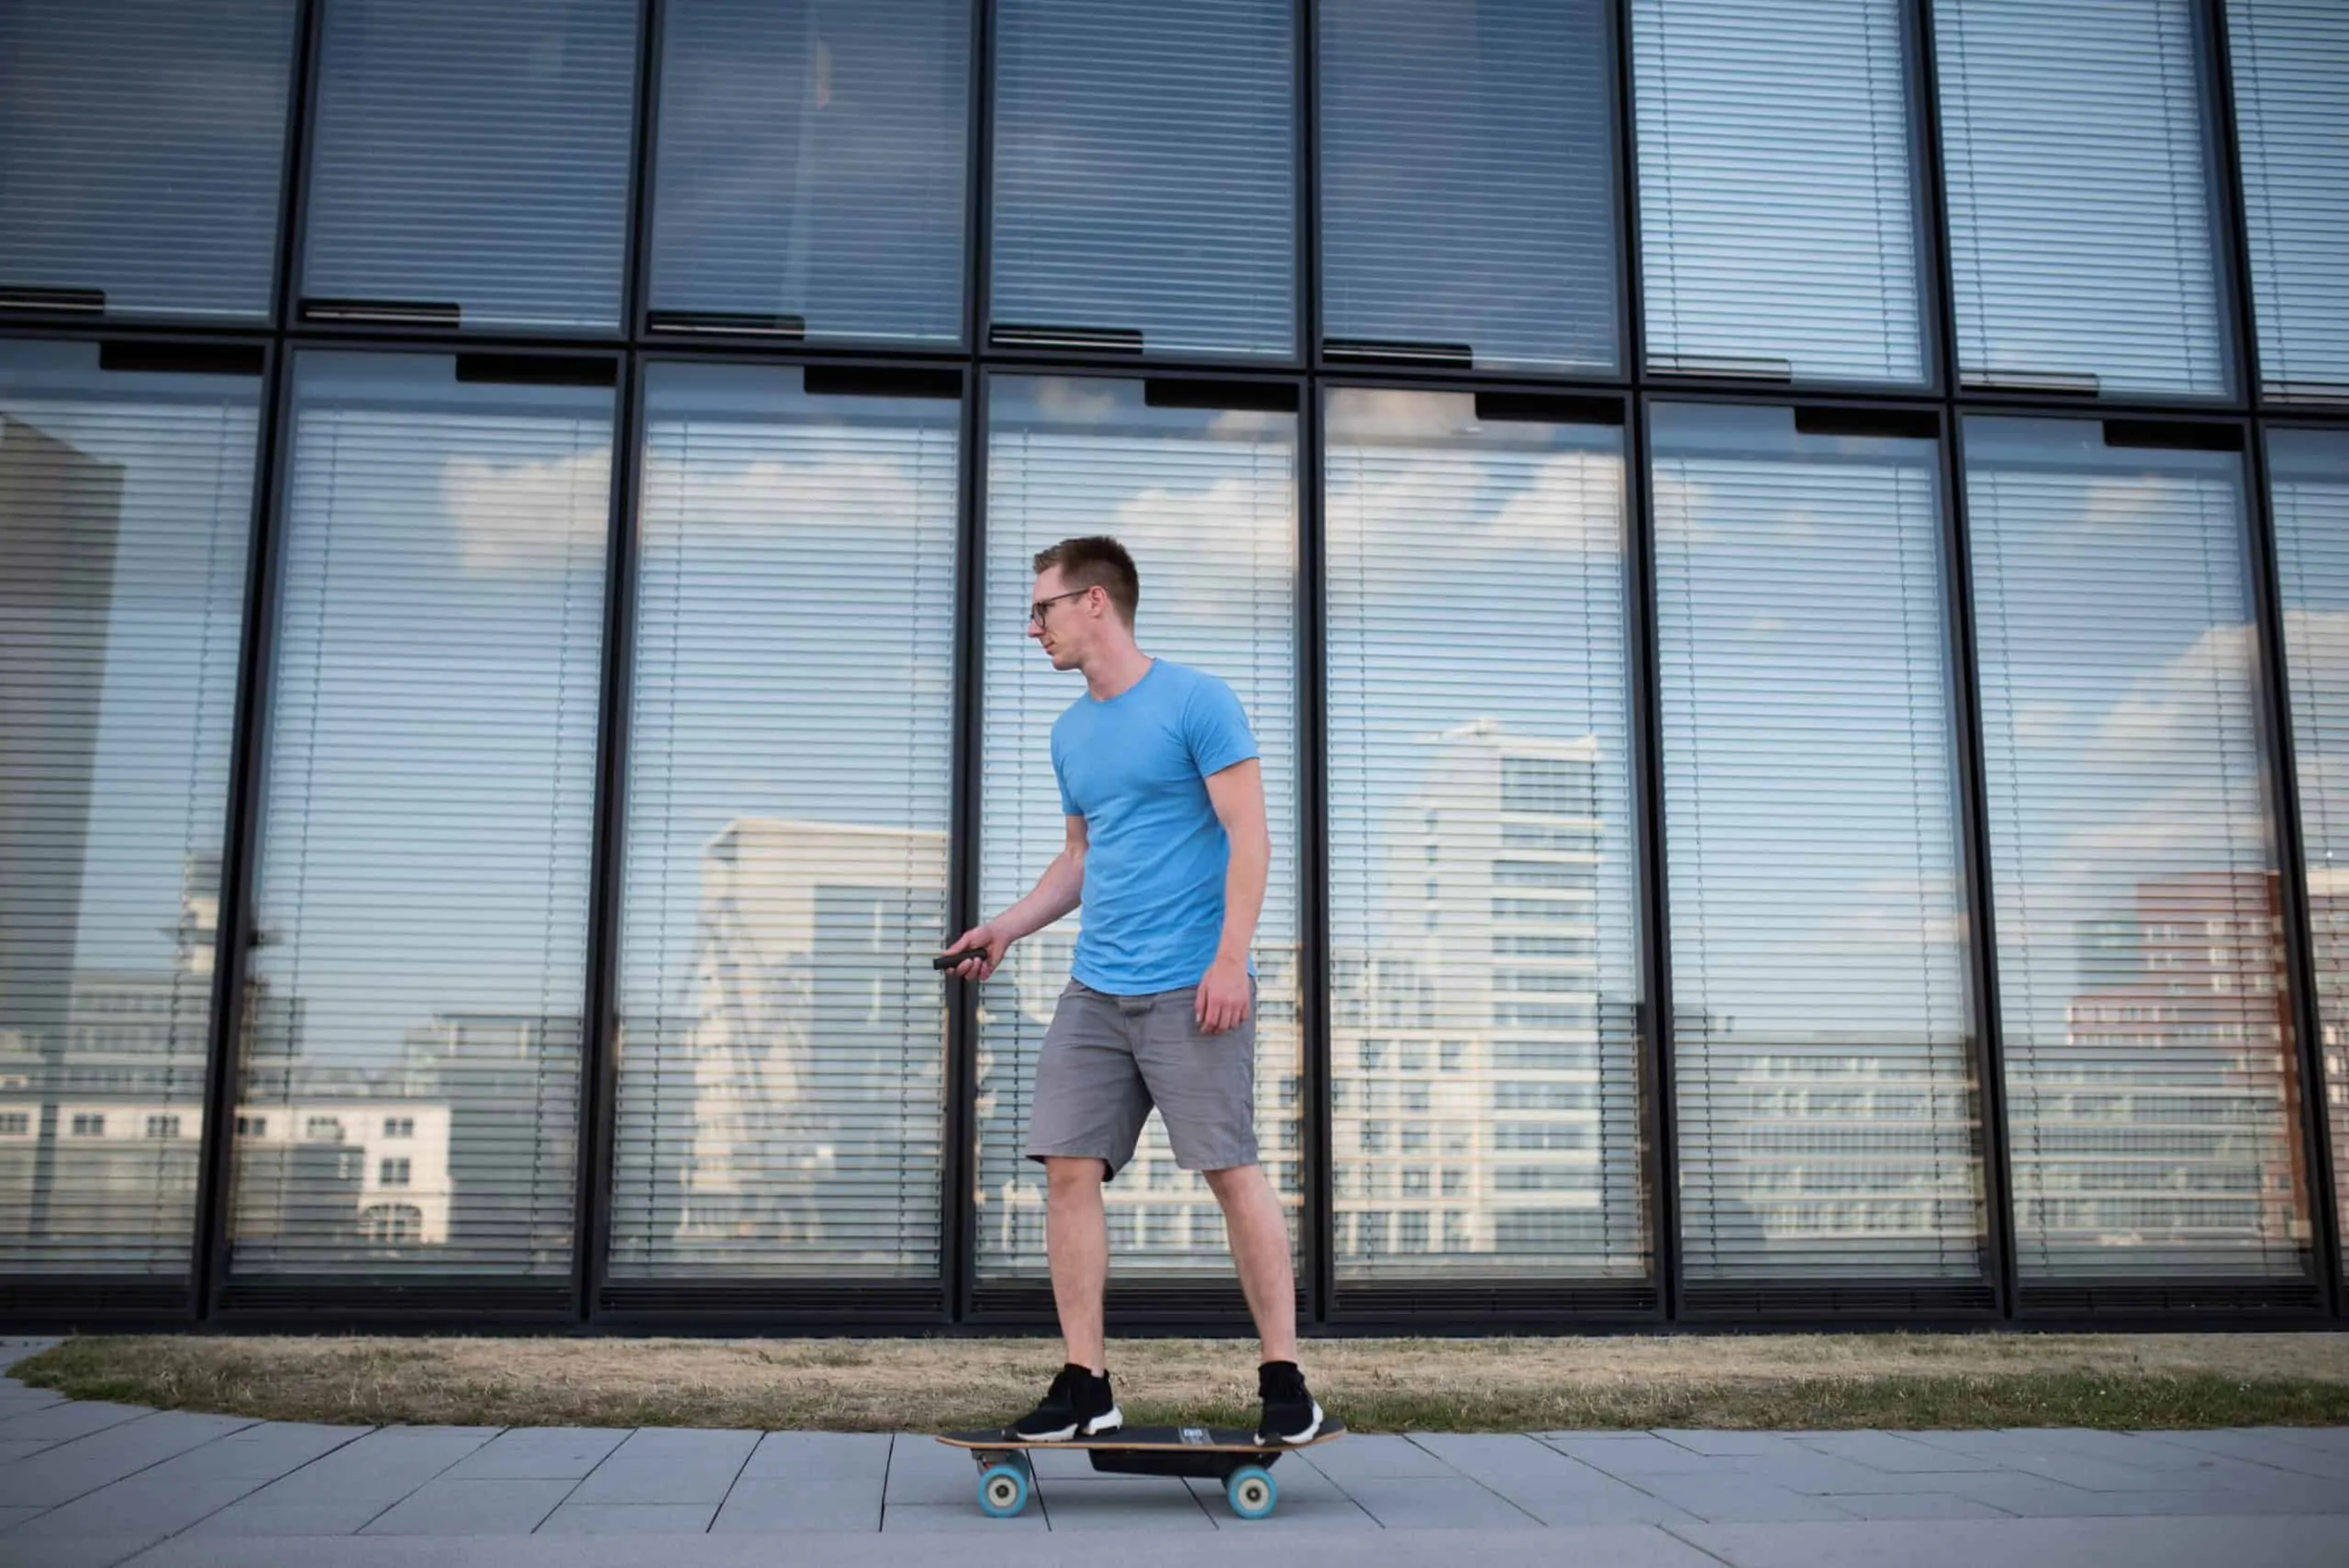 Why are Electric Skateboards Expensive?